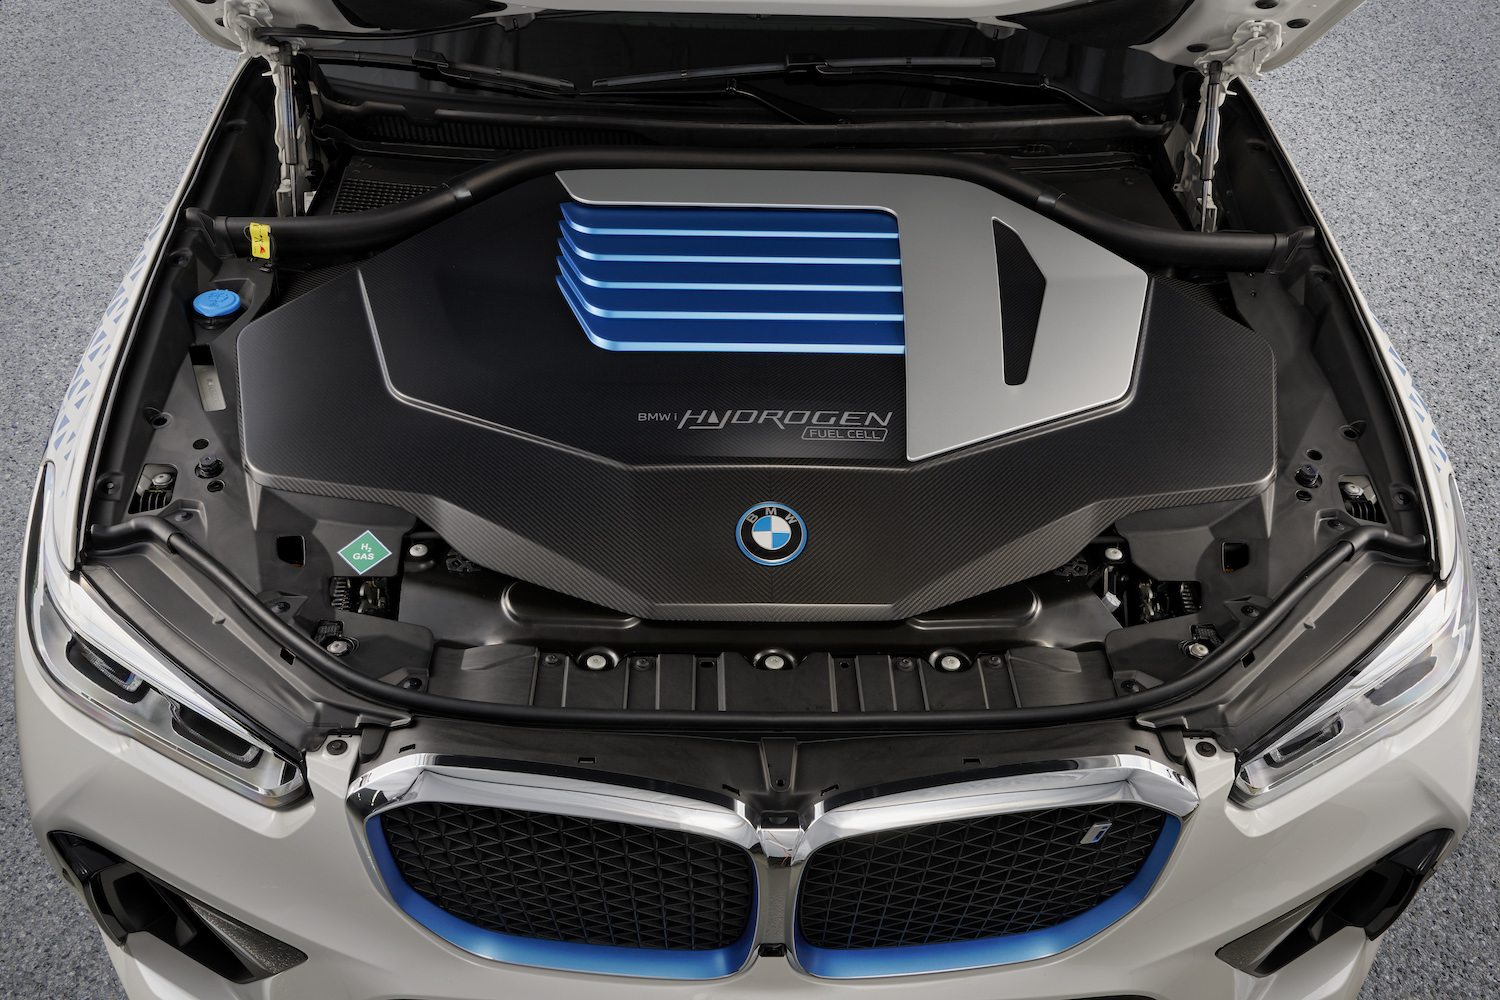 Close up photo of BMW iX5 Hydrogen fuel cell engine. underneath the hood.